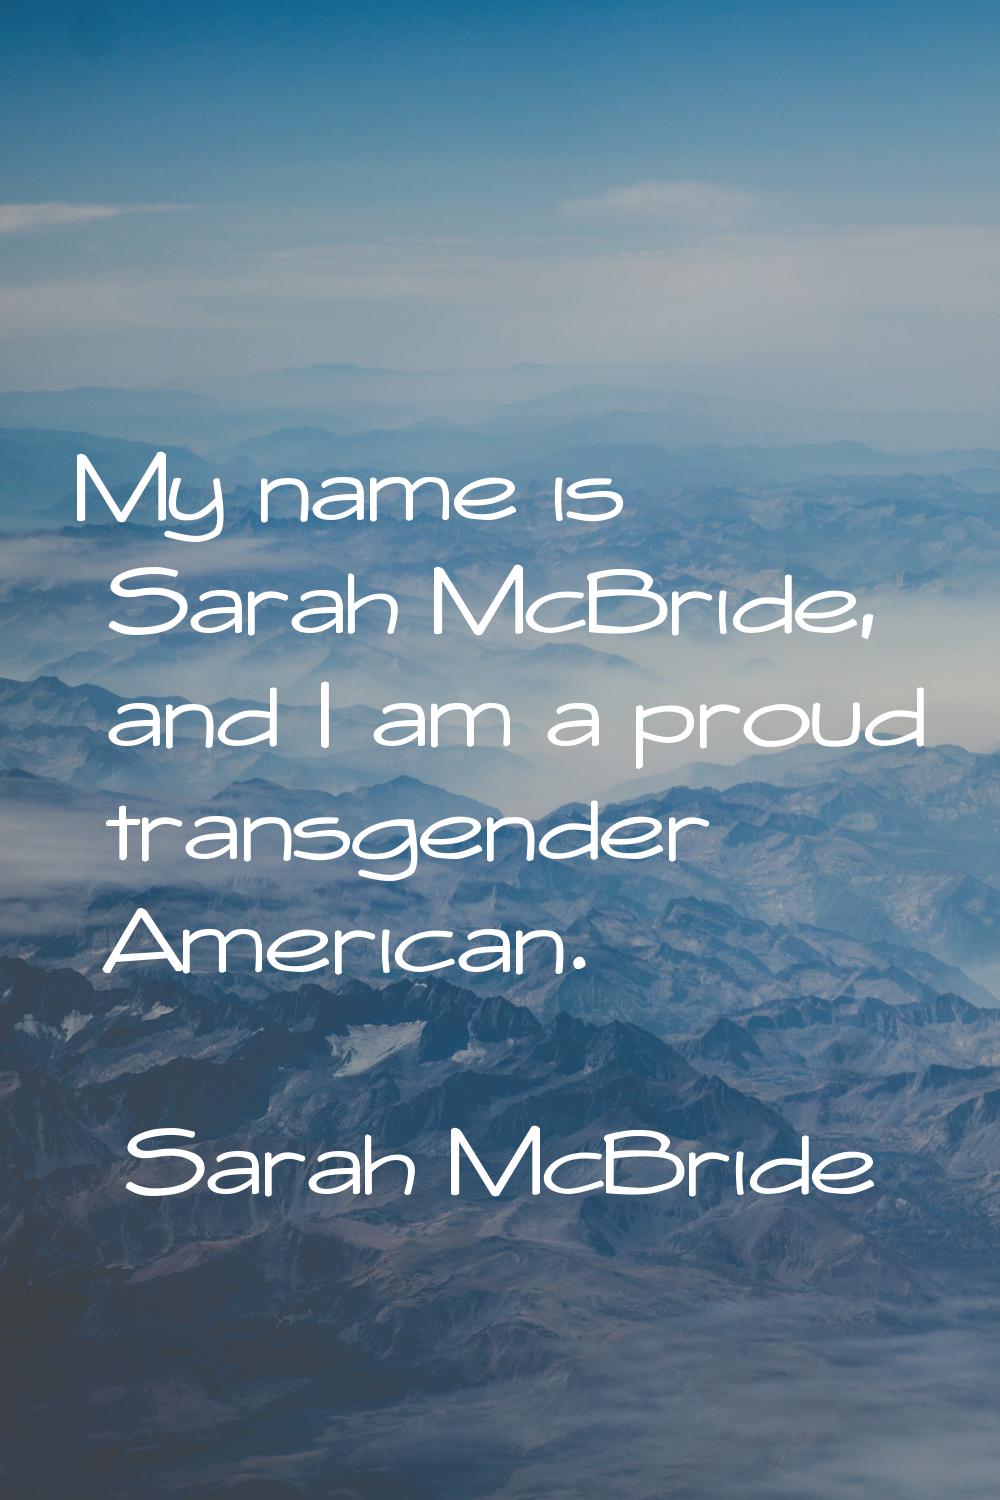 My name is Sarah McBride, and I am a proud transgender American.